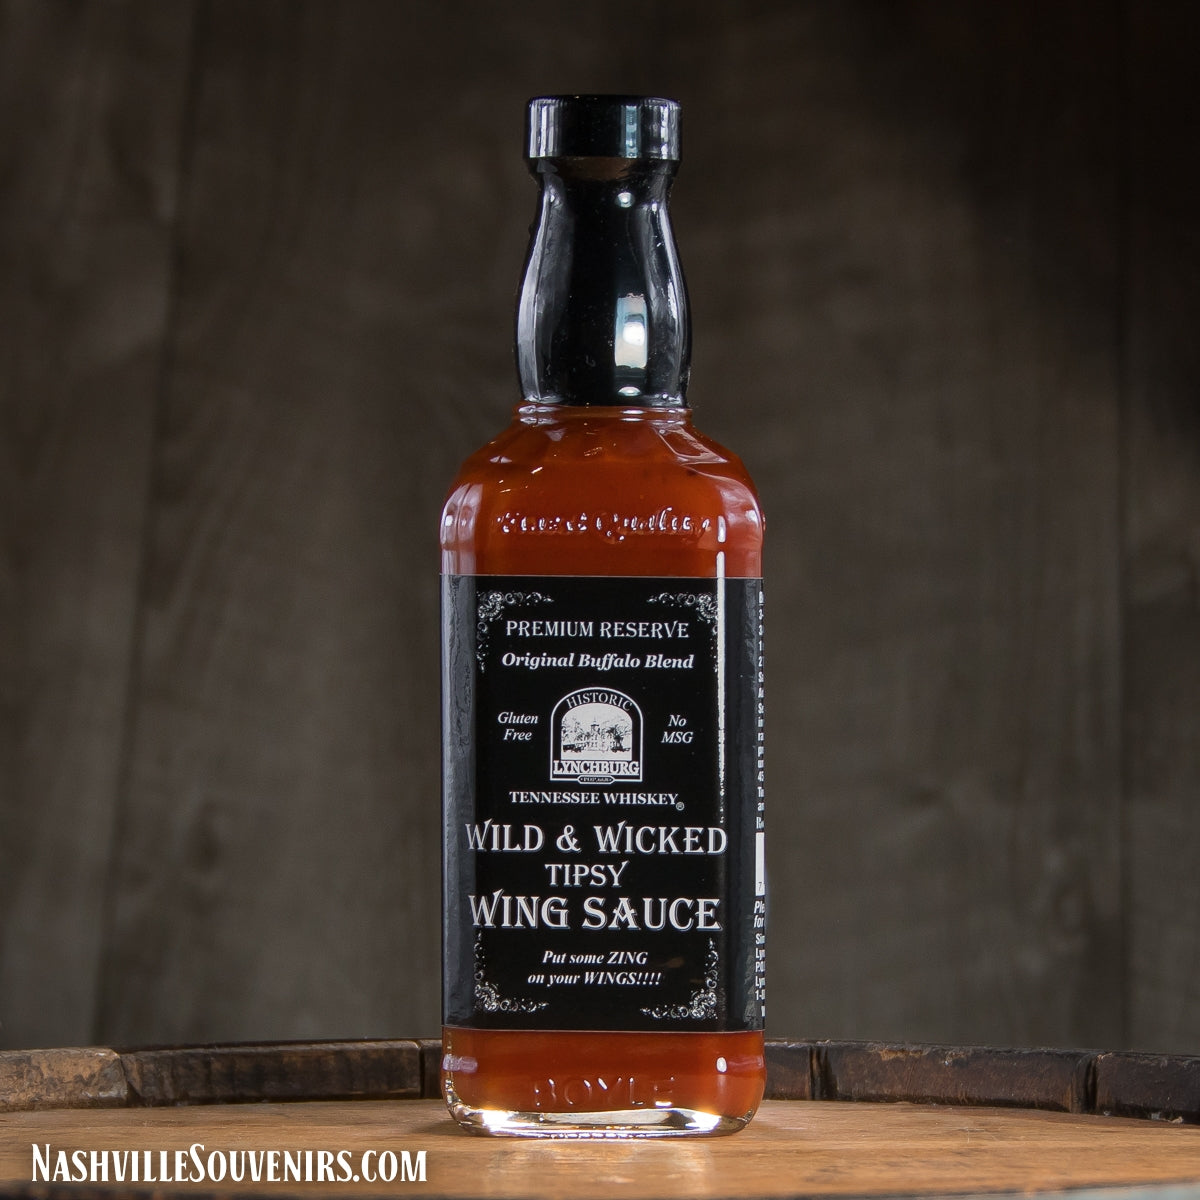 Wow! This Historic Lynchburg Wild & Wicked Wing sauce is the original Buffalo blend..put some Zing on your Wings! FREE SHIPPING on all US orders over $75!